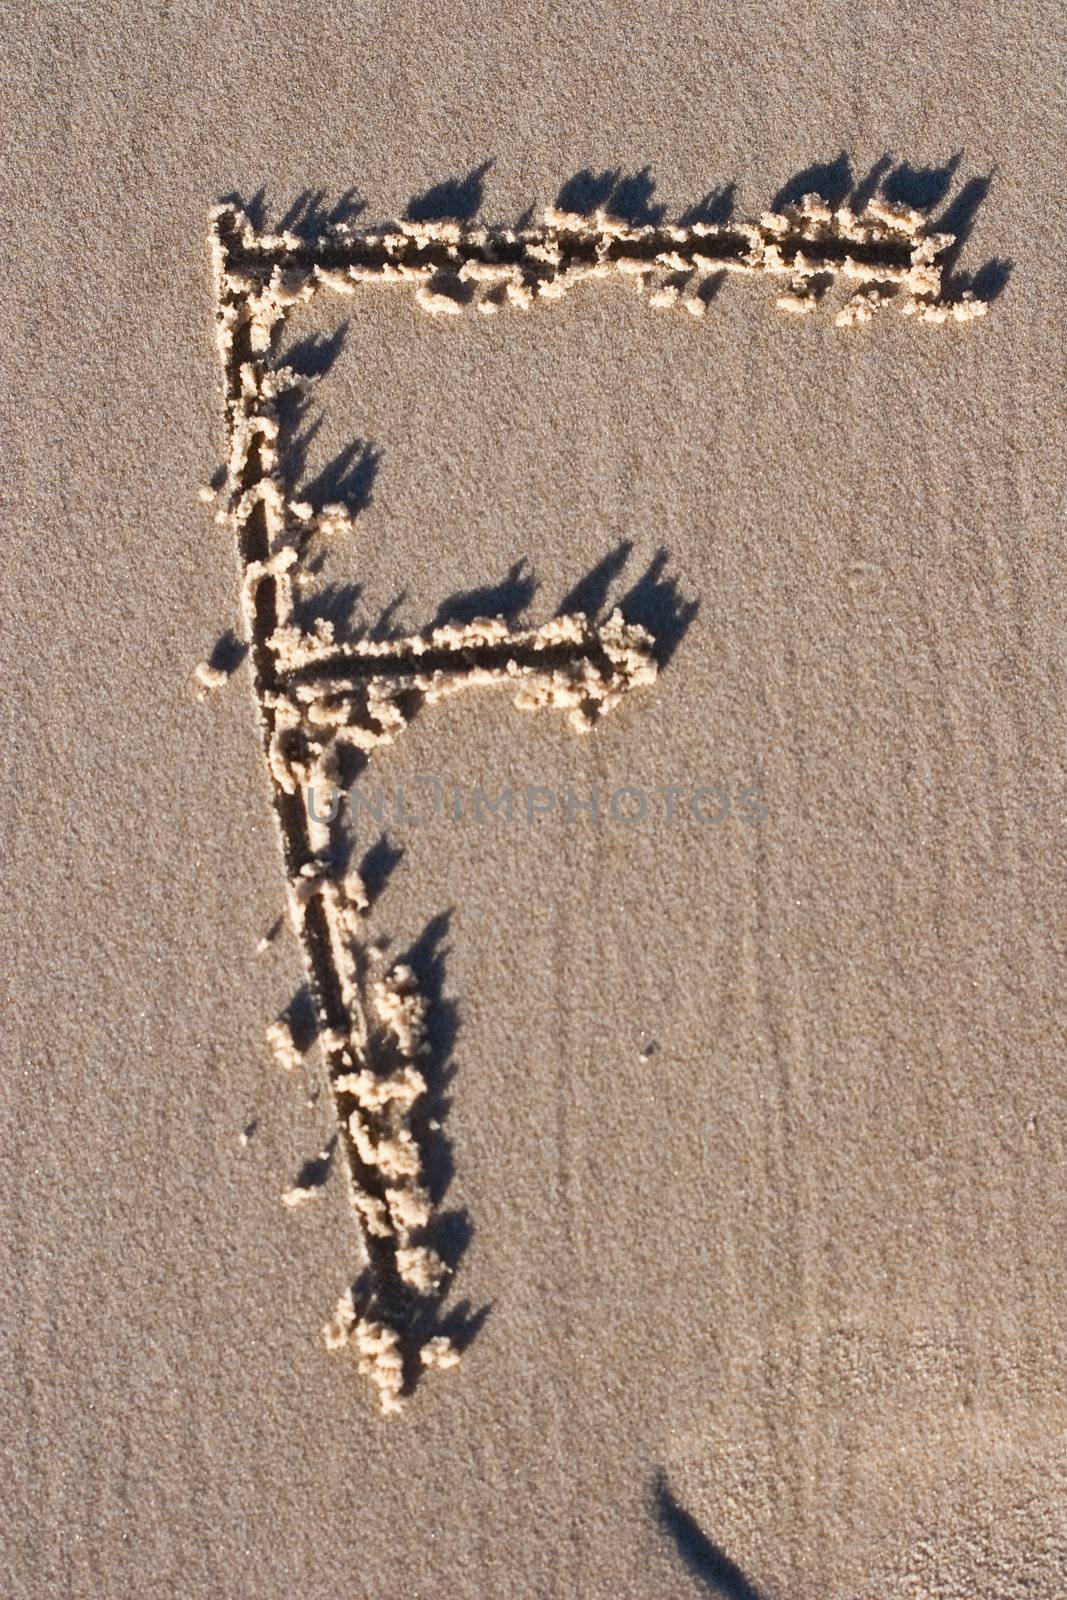 Letter F Drawn in the sand.